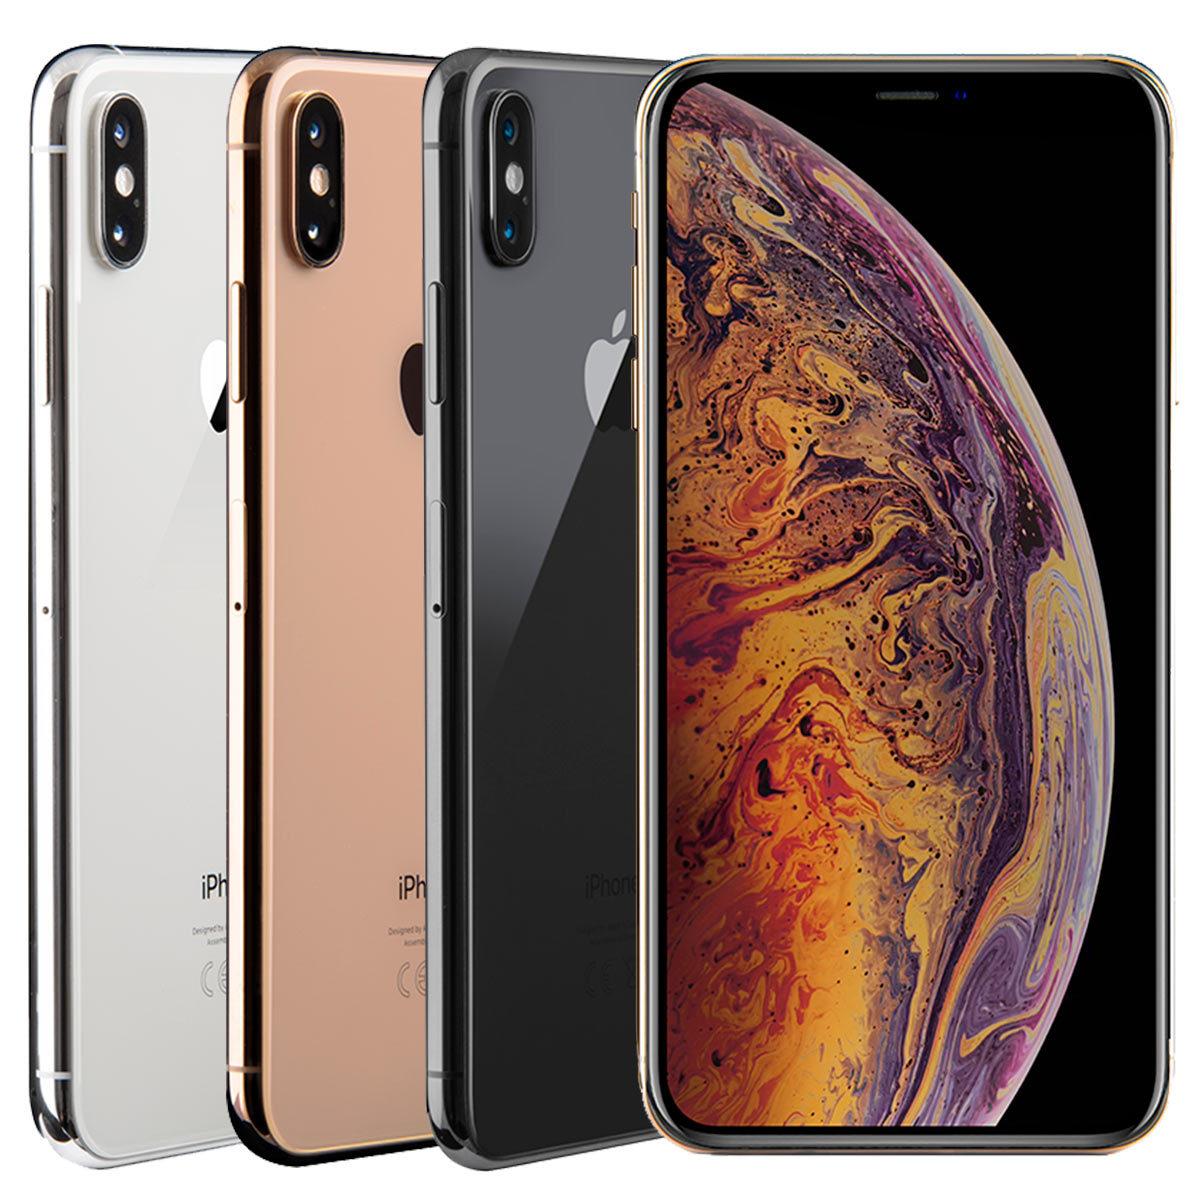  iPhone XS Max افضل هواتف ايفون